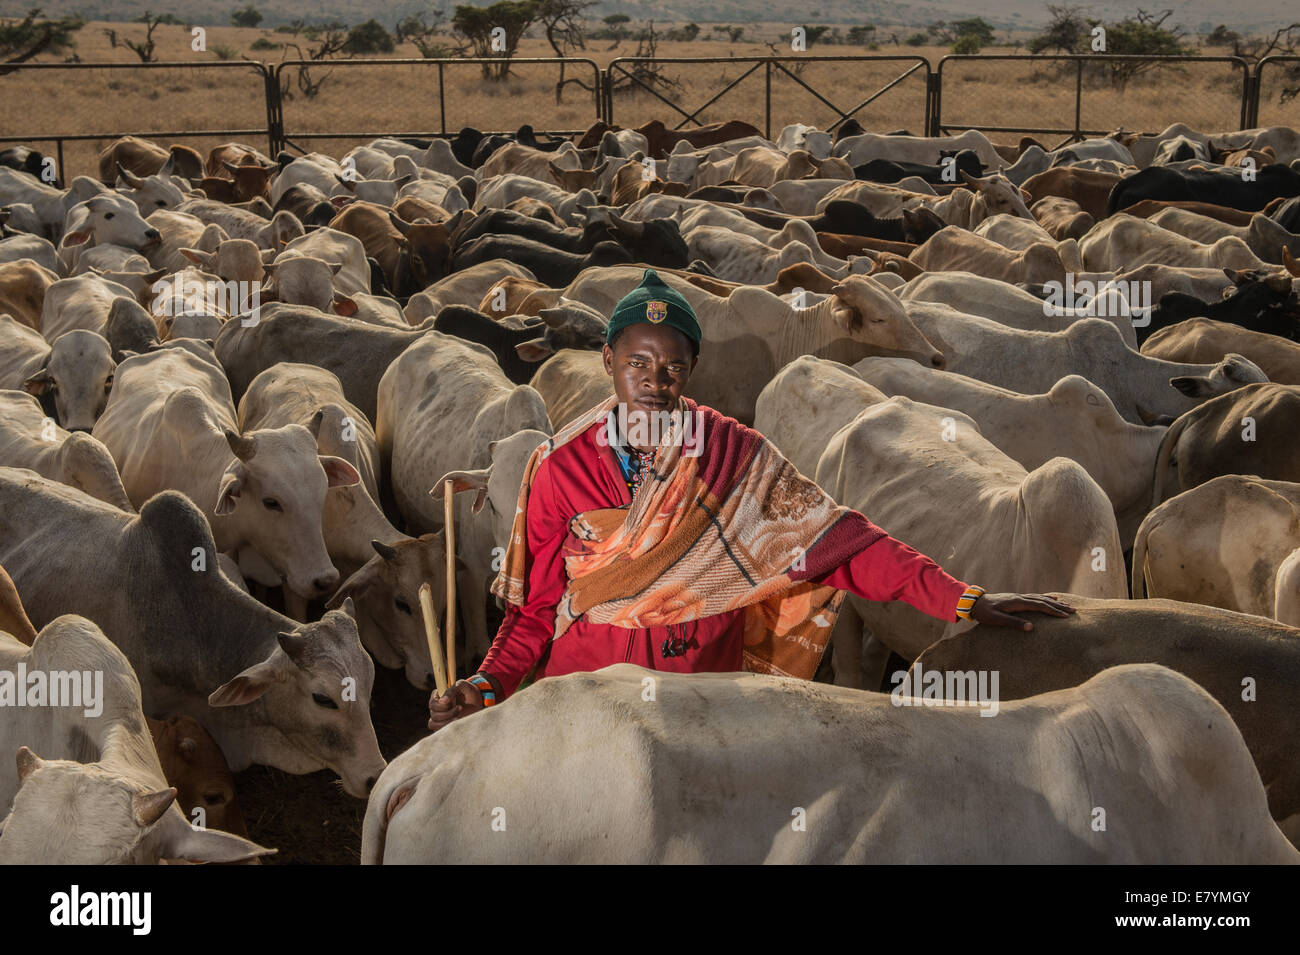 Mechuki Maragos watches over cattle at Lewa Wildlife Conservancy which is part of a “Livestock to Market” business that shifts m Stock Photo